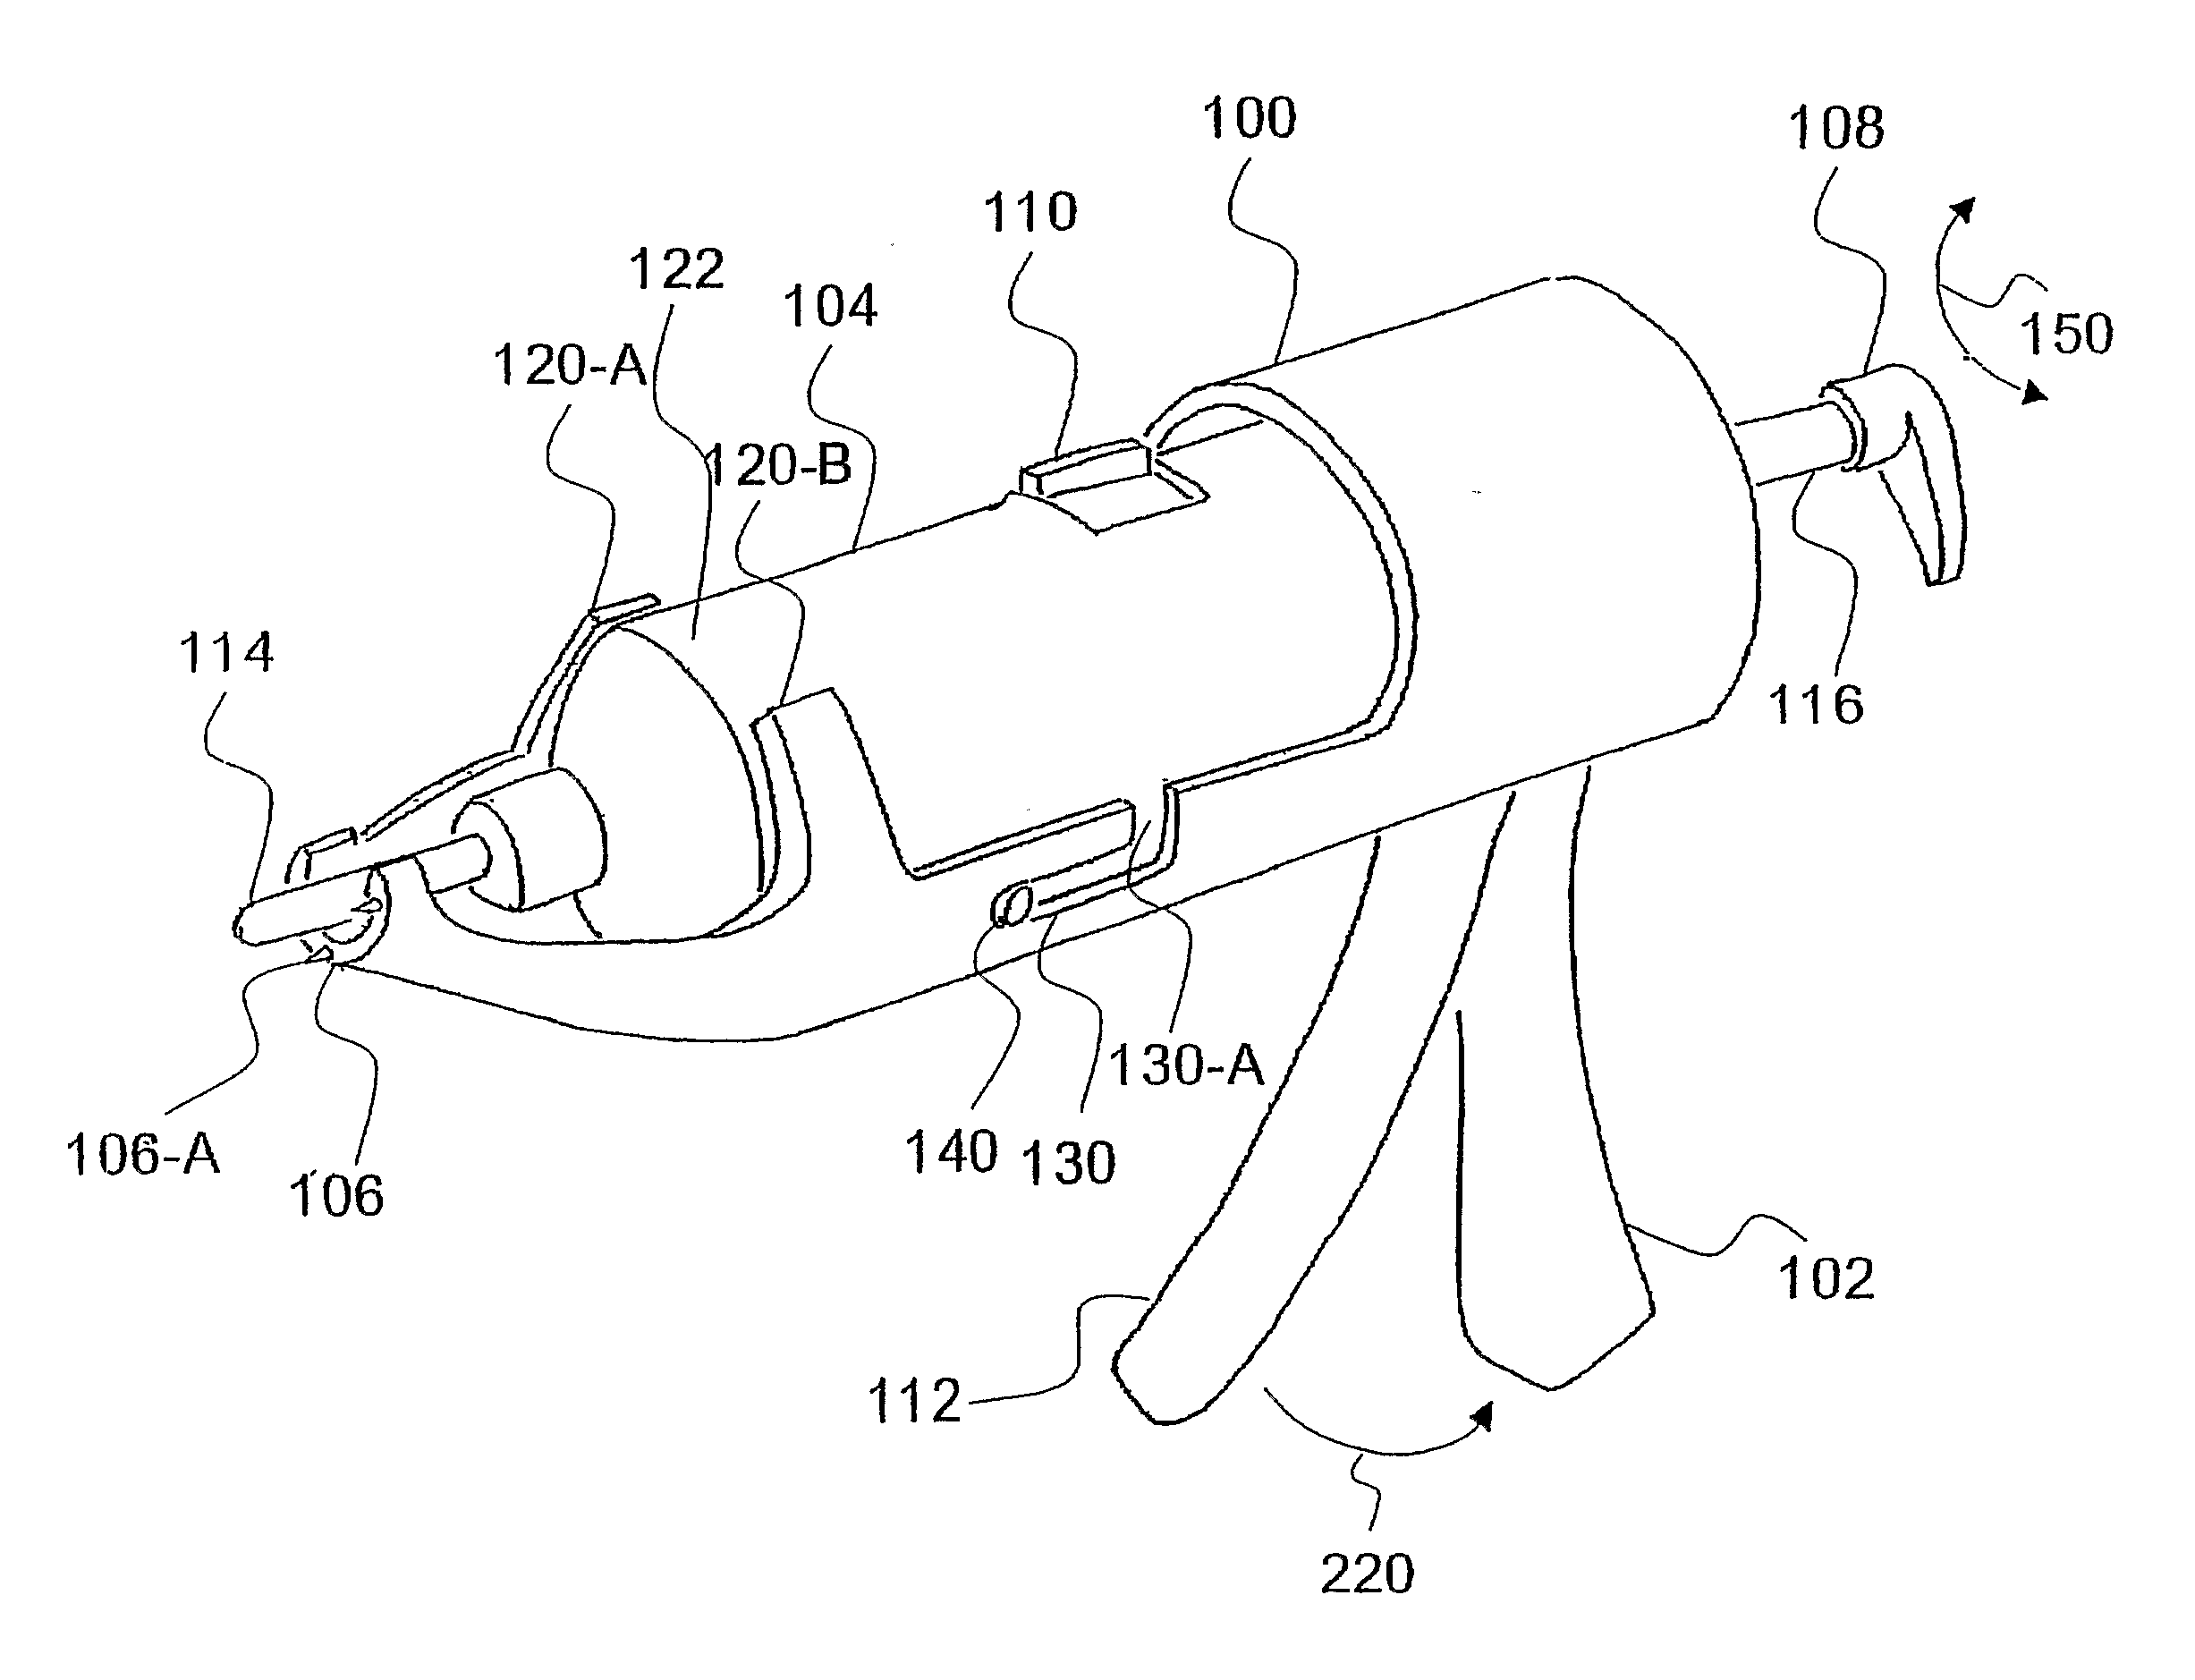 Apparatus and method thereof for drilling holes in discrete controlled increments